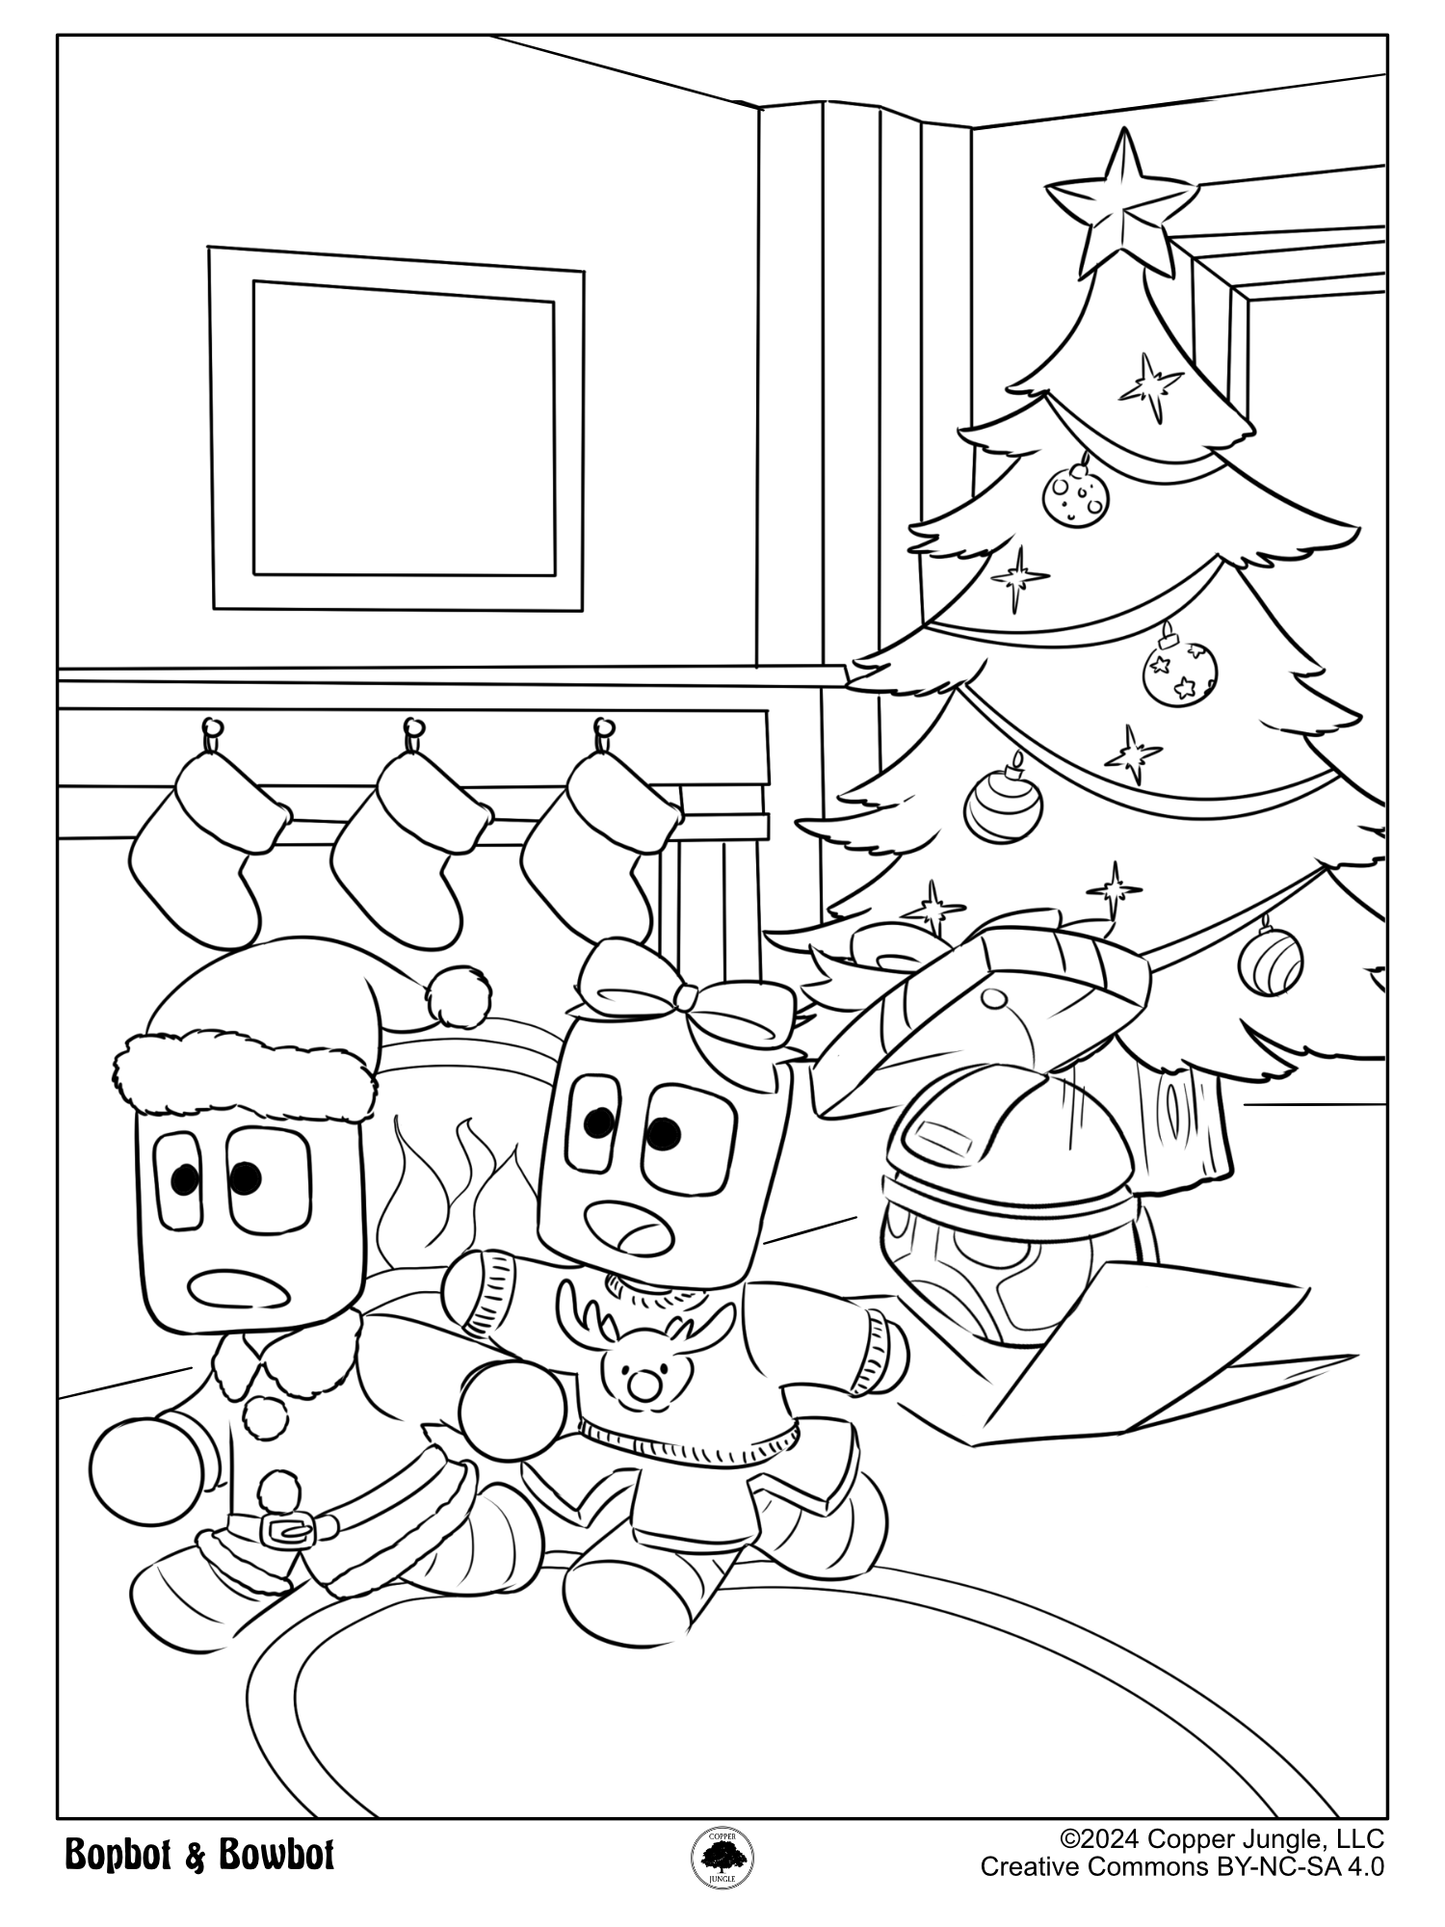 Christmas Present Coloring Page